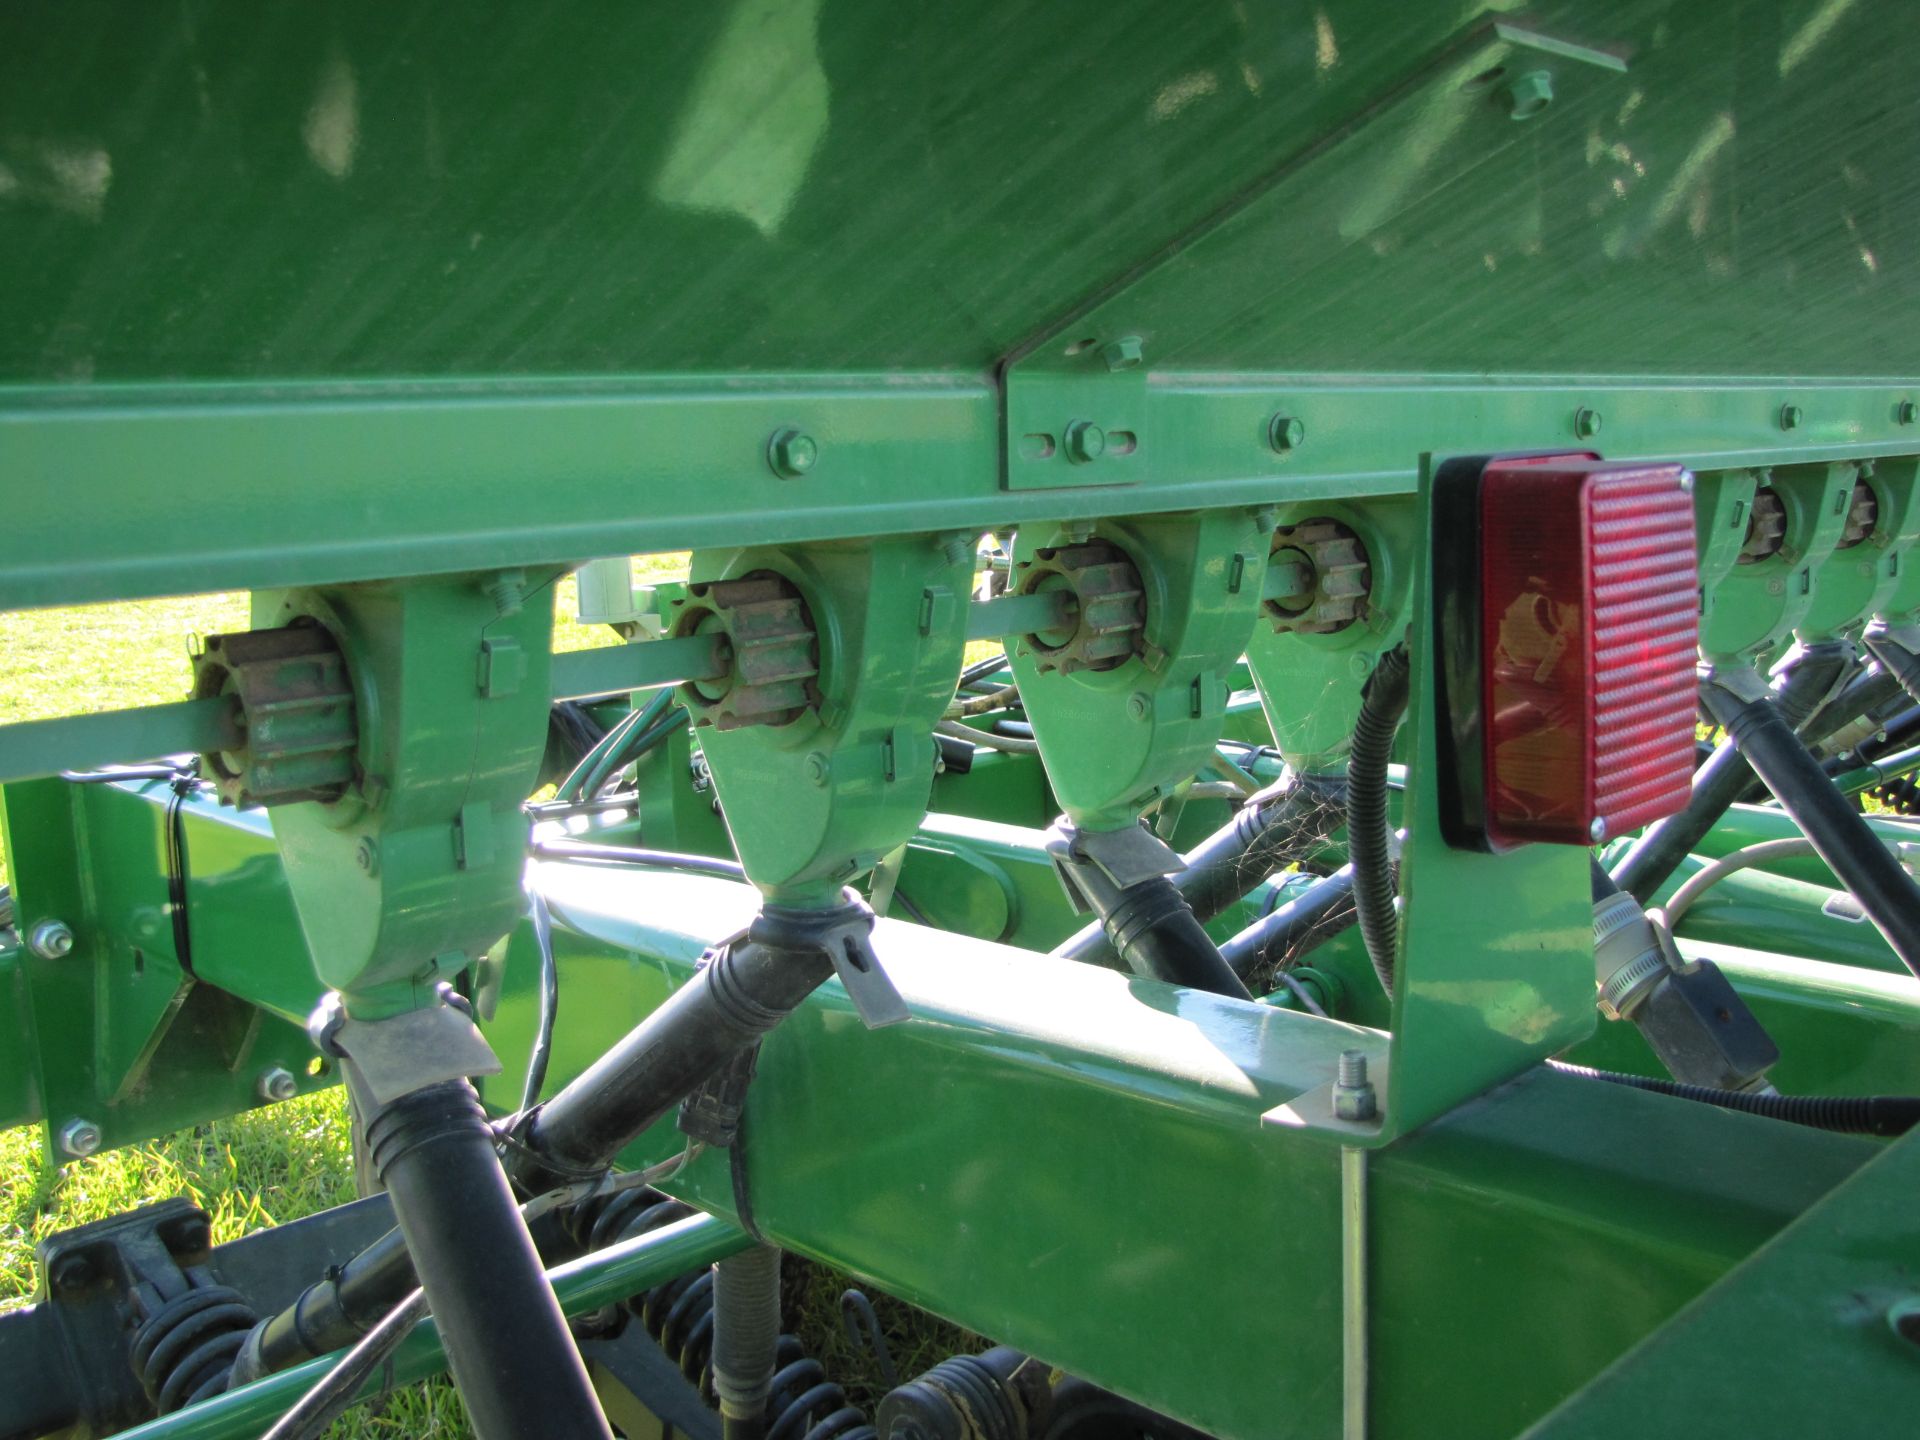 15’ John Deere 1590 no-till drill, elec rate controller, 7 ½” spacing, markers, wired for monitor - Image 20 of 33